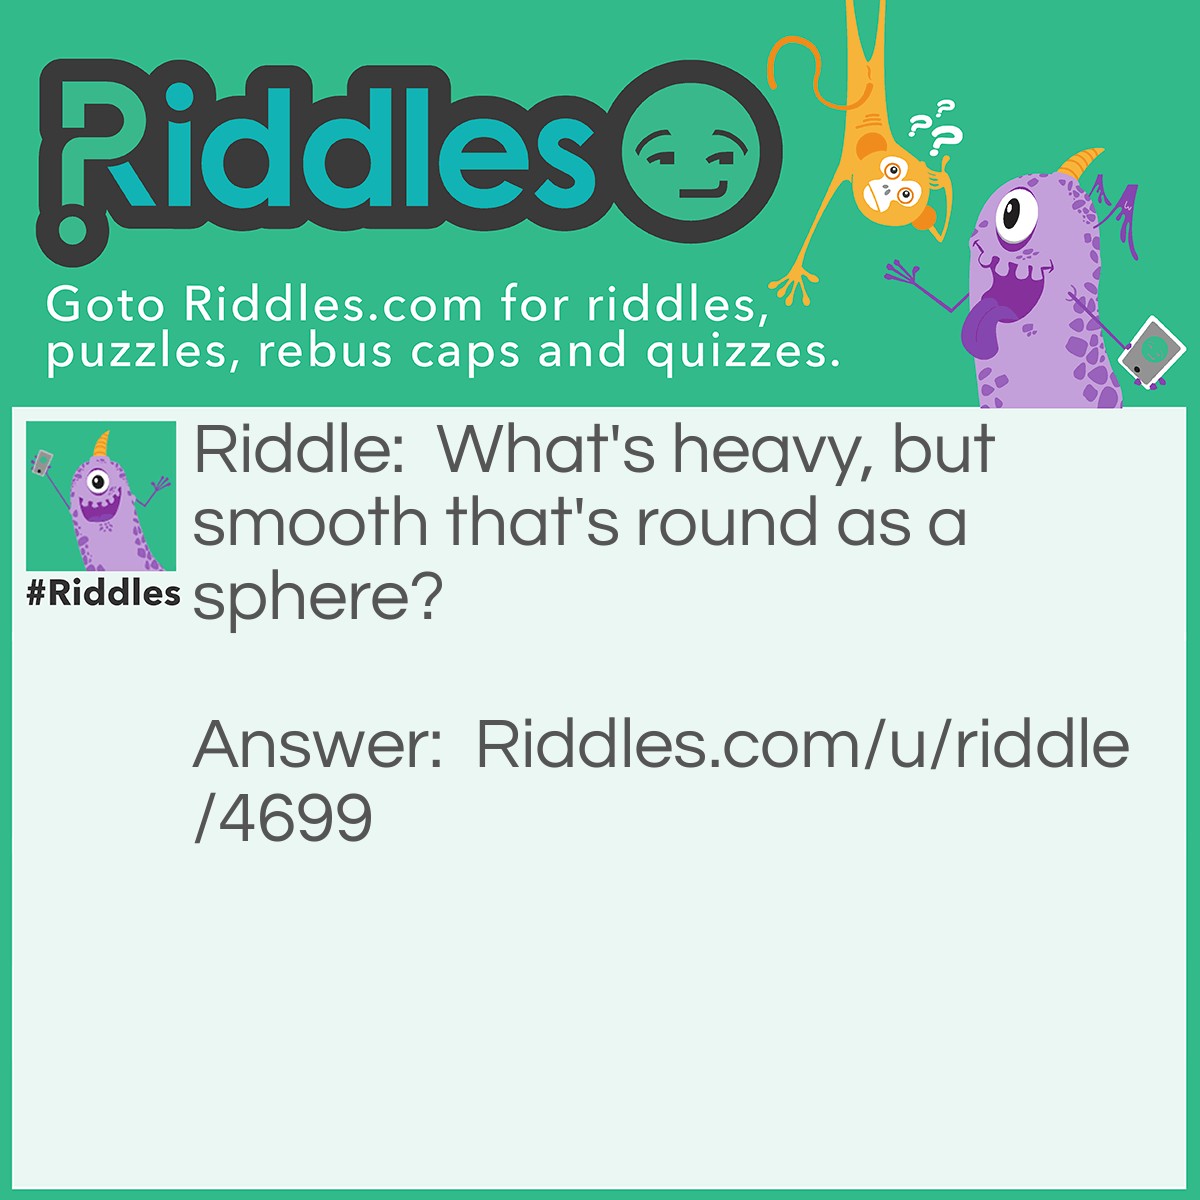 Riddle: What's heavy, but smooth that's round as a sphere? Answer: A bowling ball.